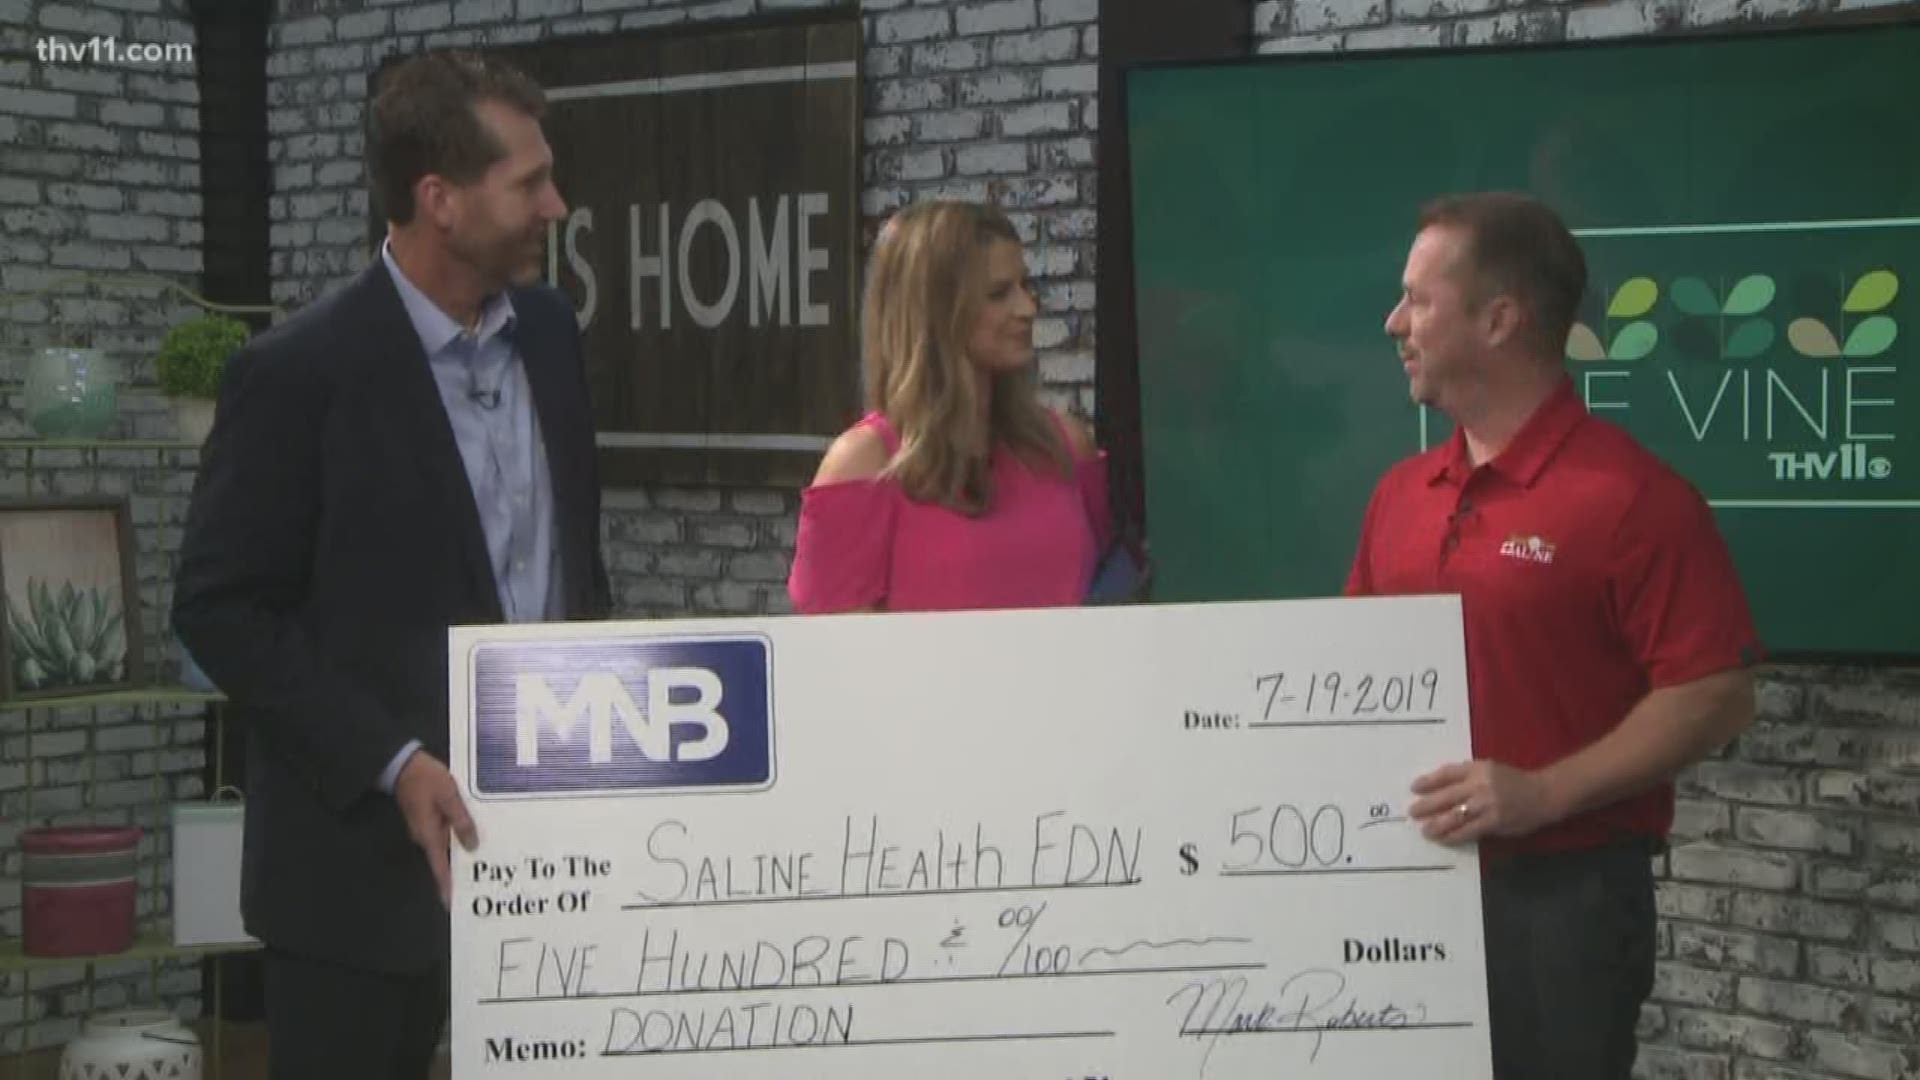 THV11 and MNB Bank have partnered for three years on "A Road to a Better Community" series.